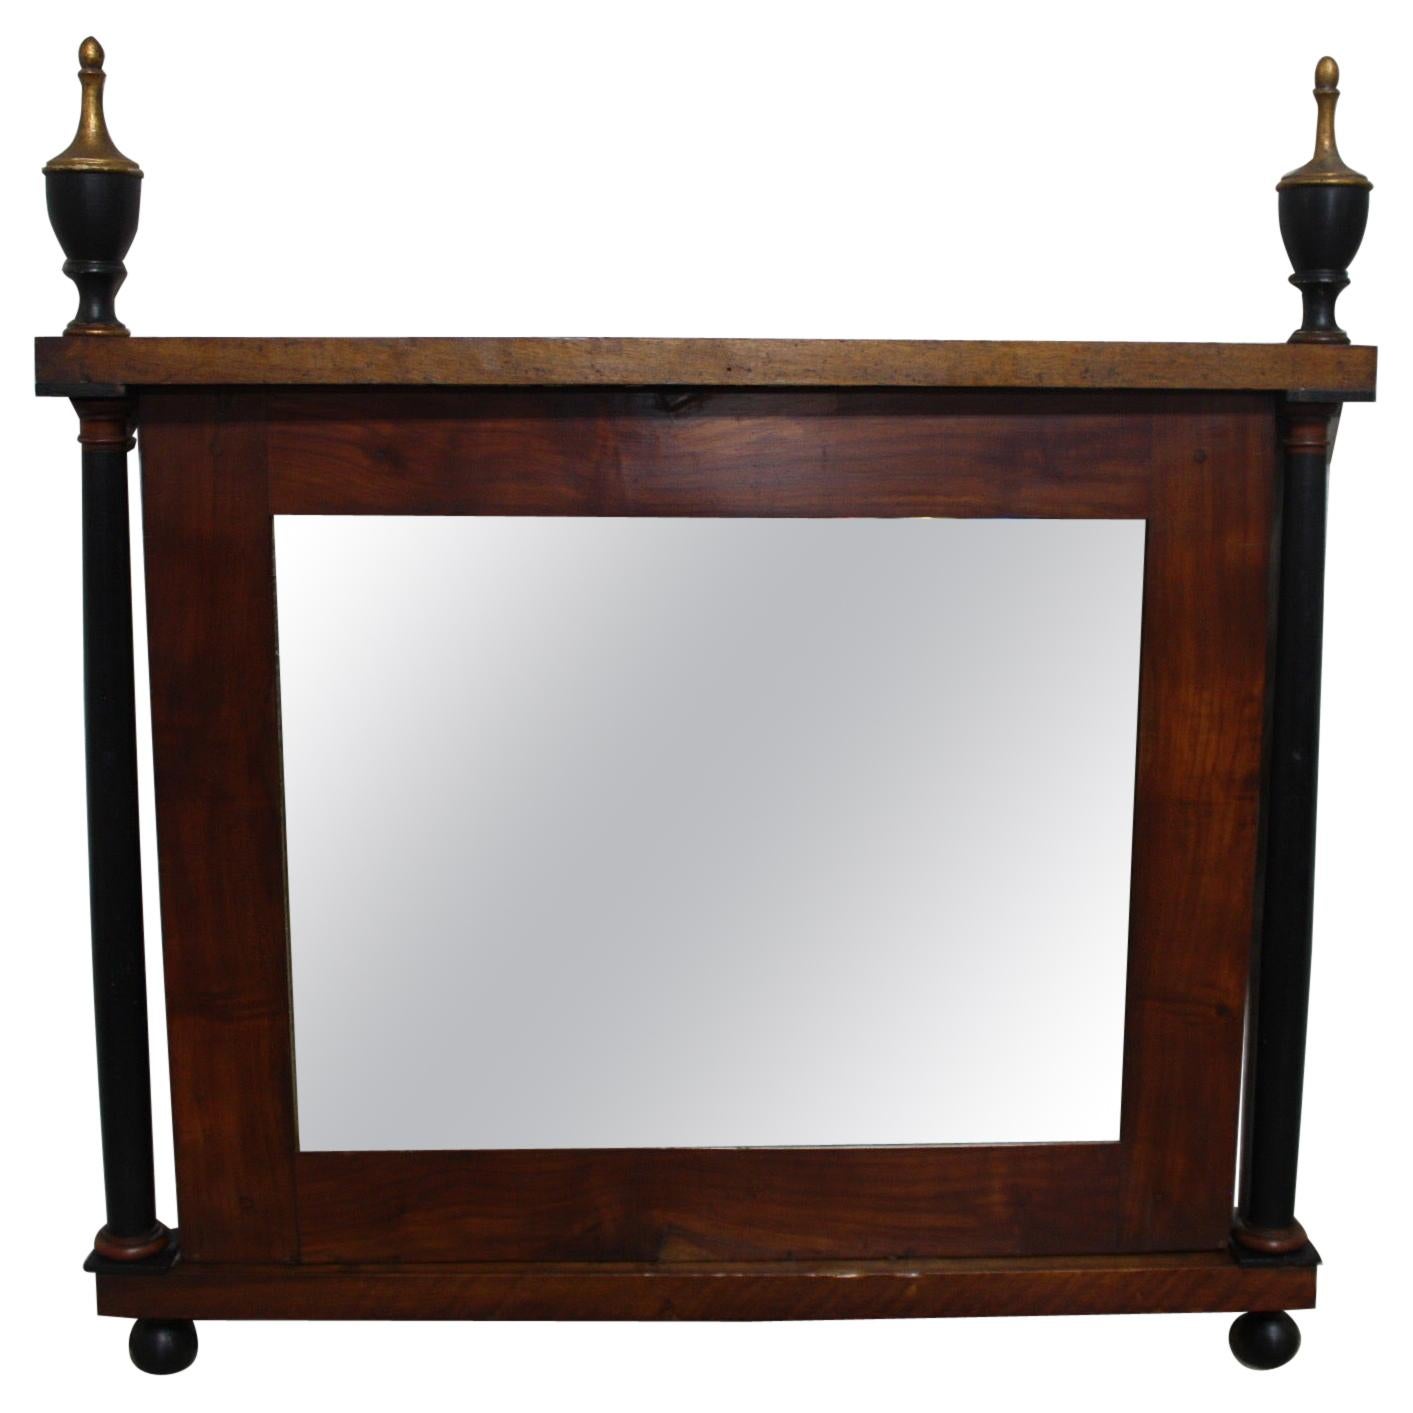 Early 19th Century French Empire Period Mirror